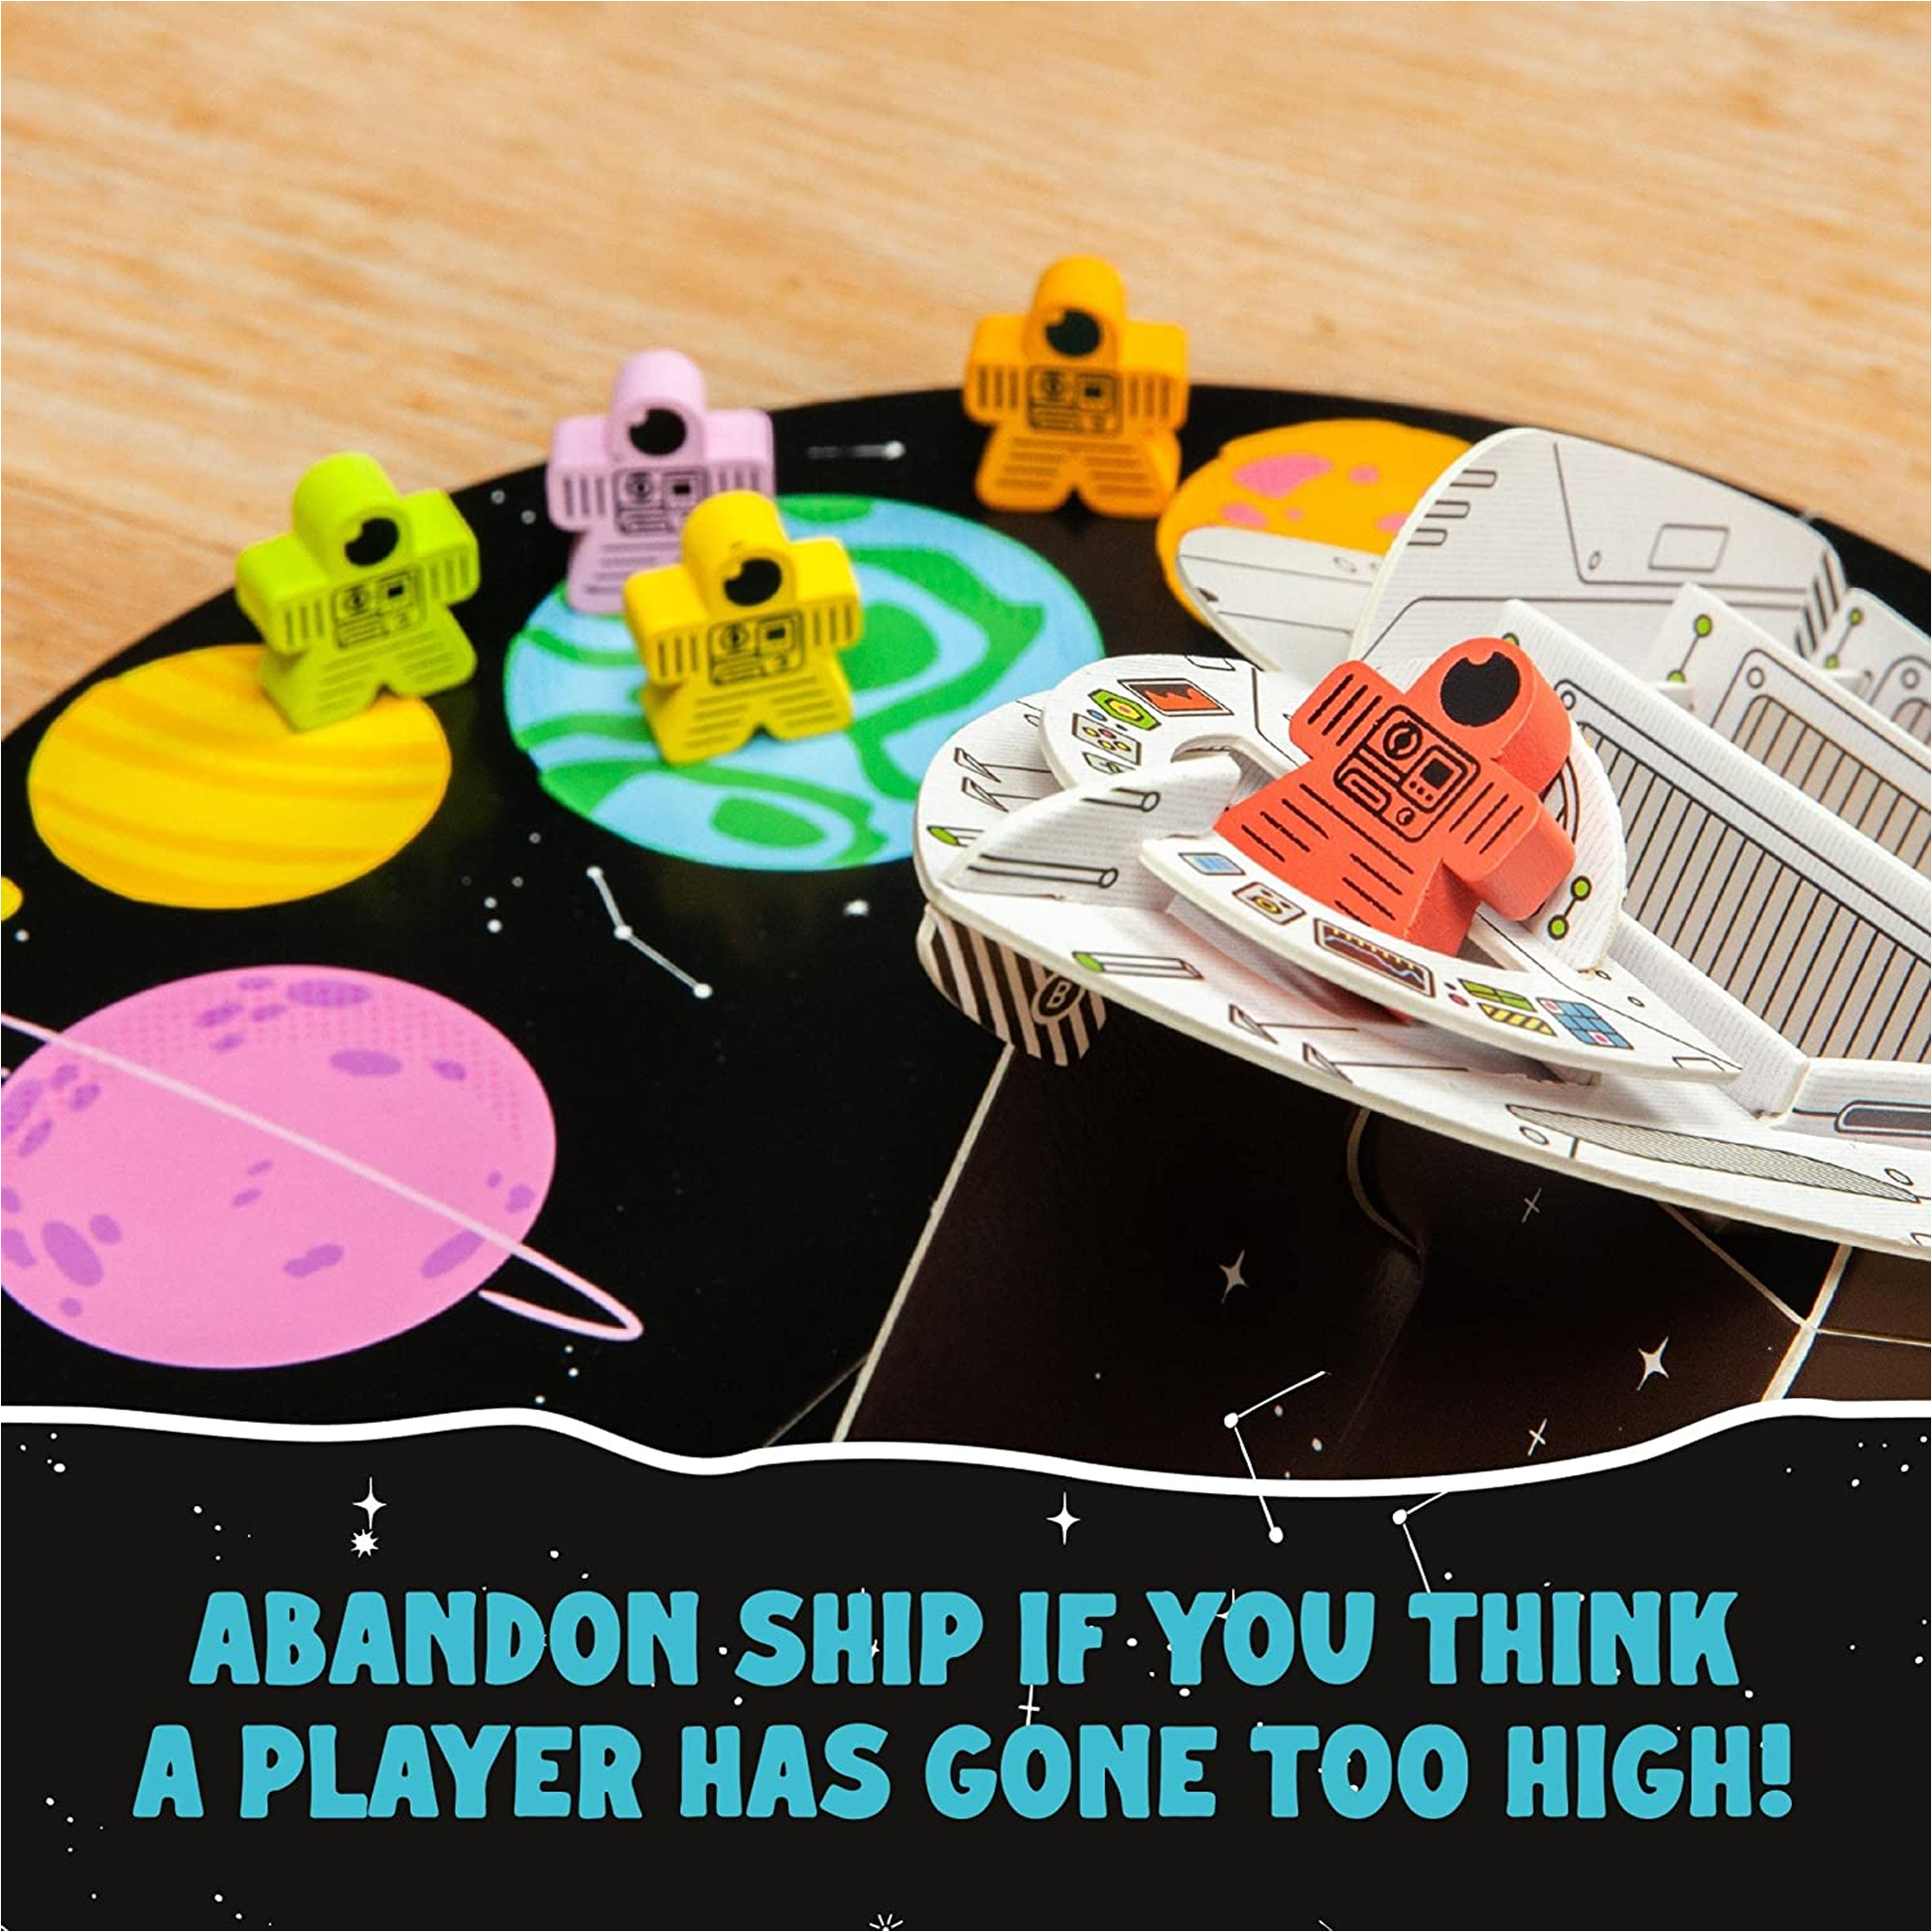 Shoot for the Stars Board Game Play Example | Happy Piranha